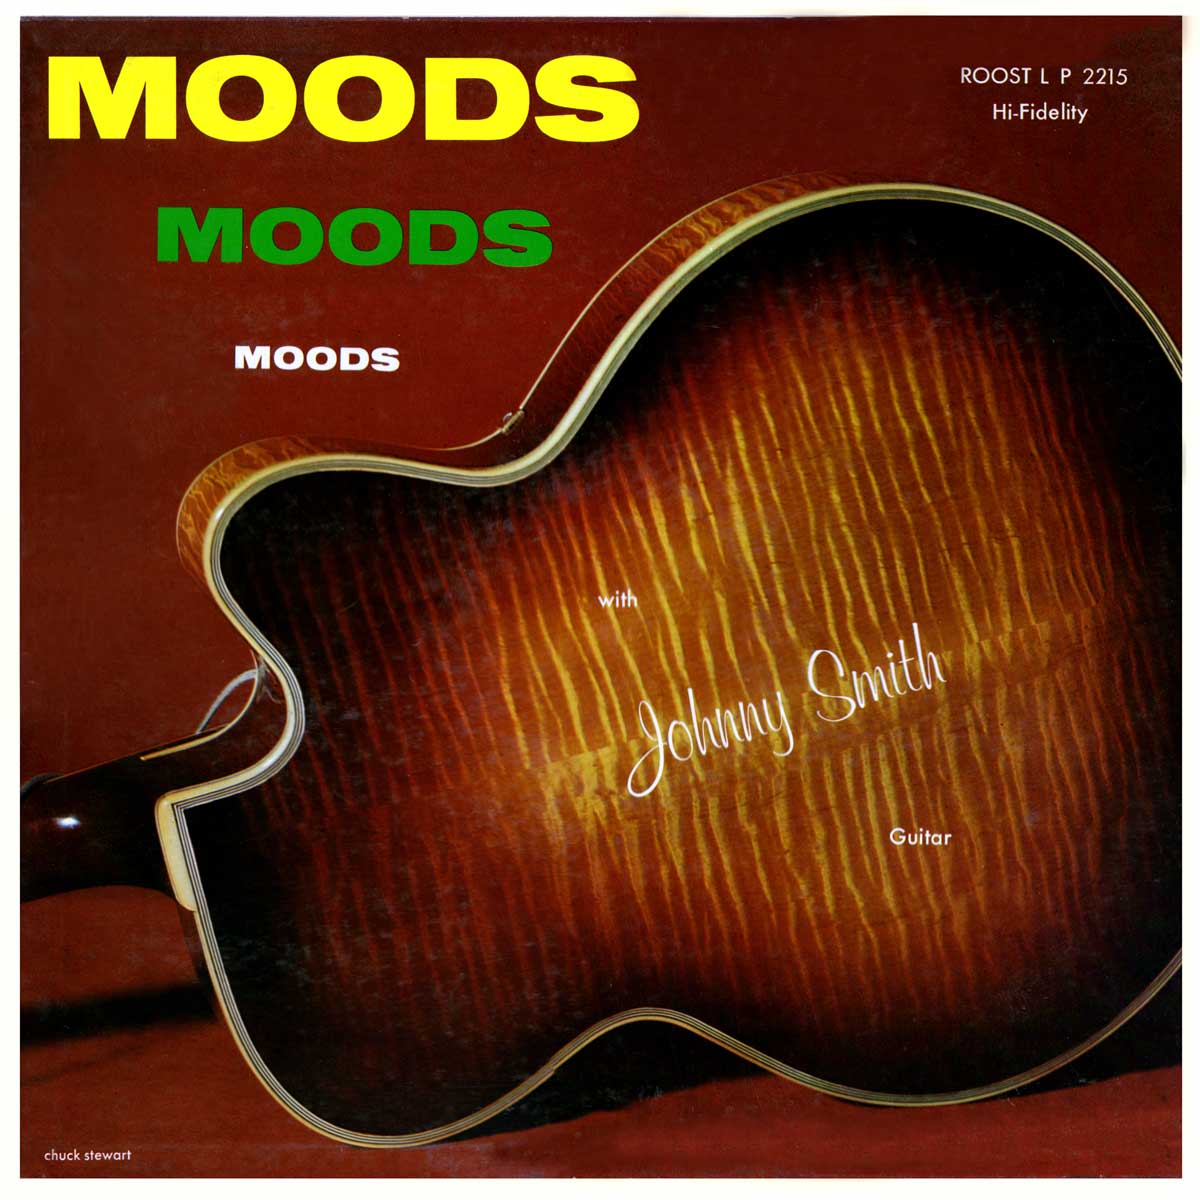 Johnny Smith - Moods - Front cover